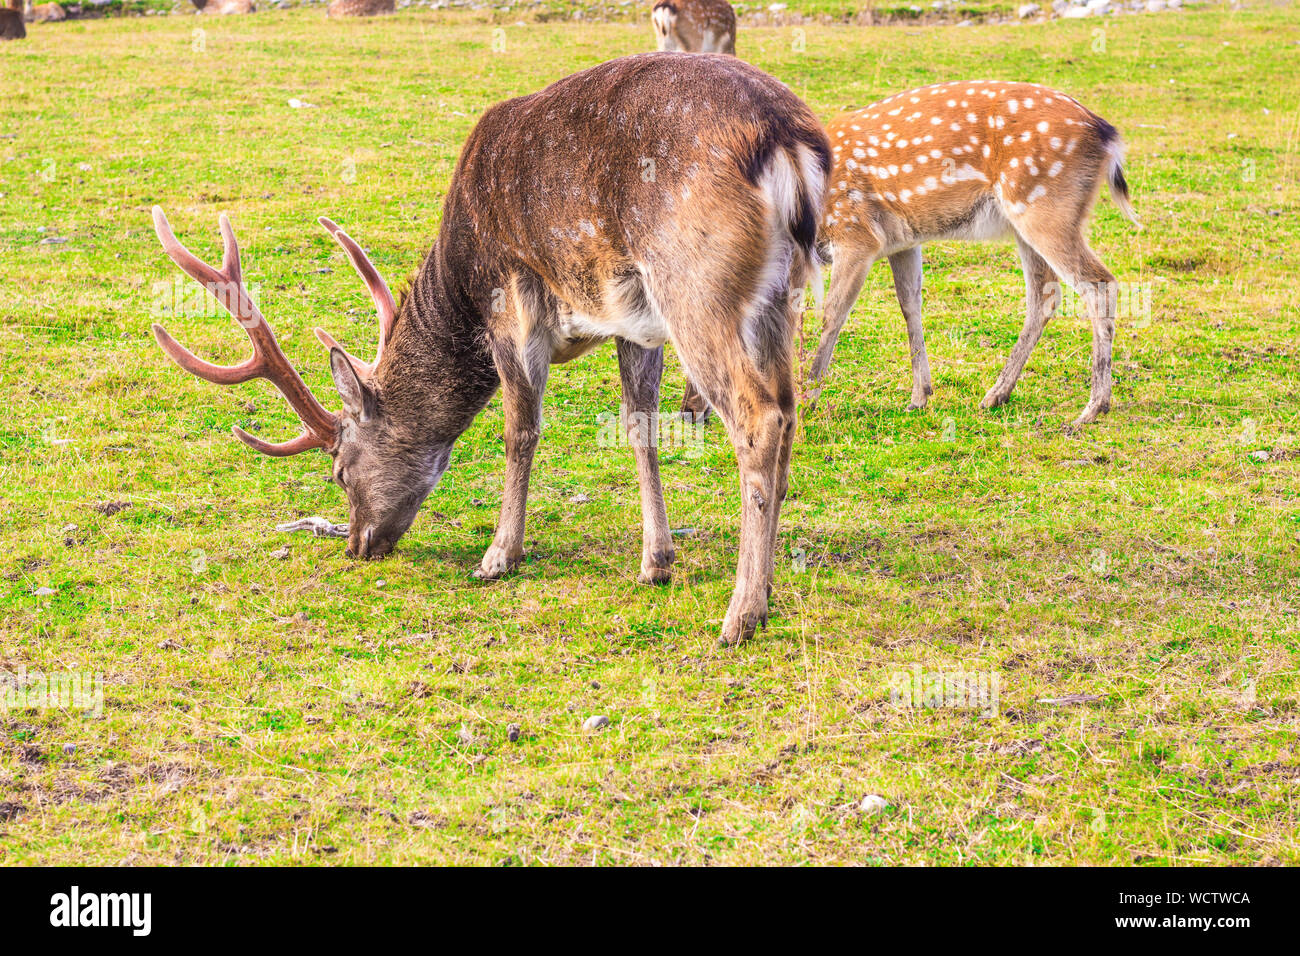 Sika deer graze in a clearing. The male deer has large horns on its head, and the female has no horns. Stock Photo